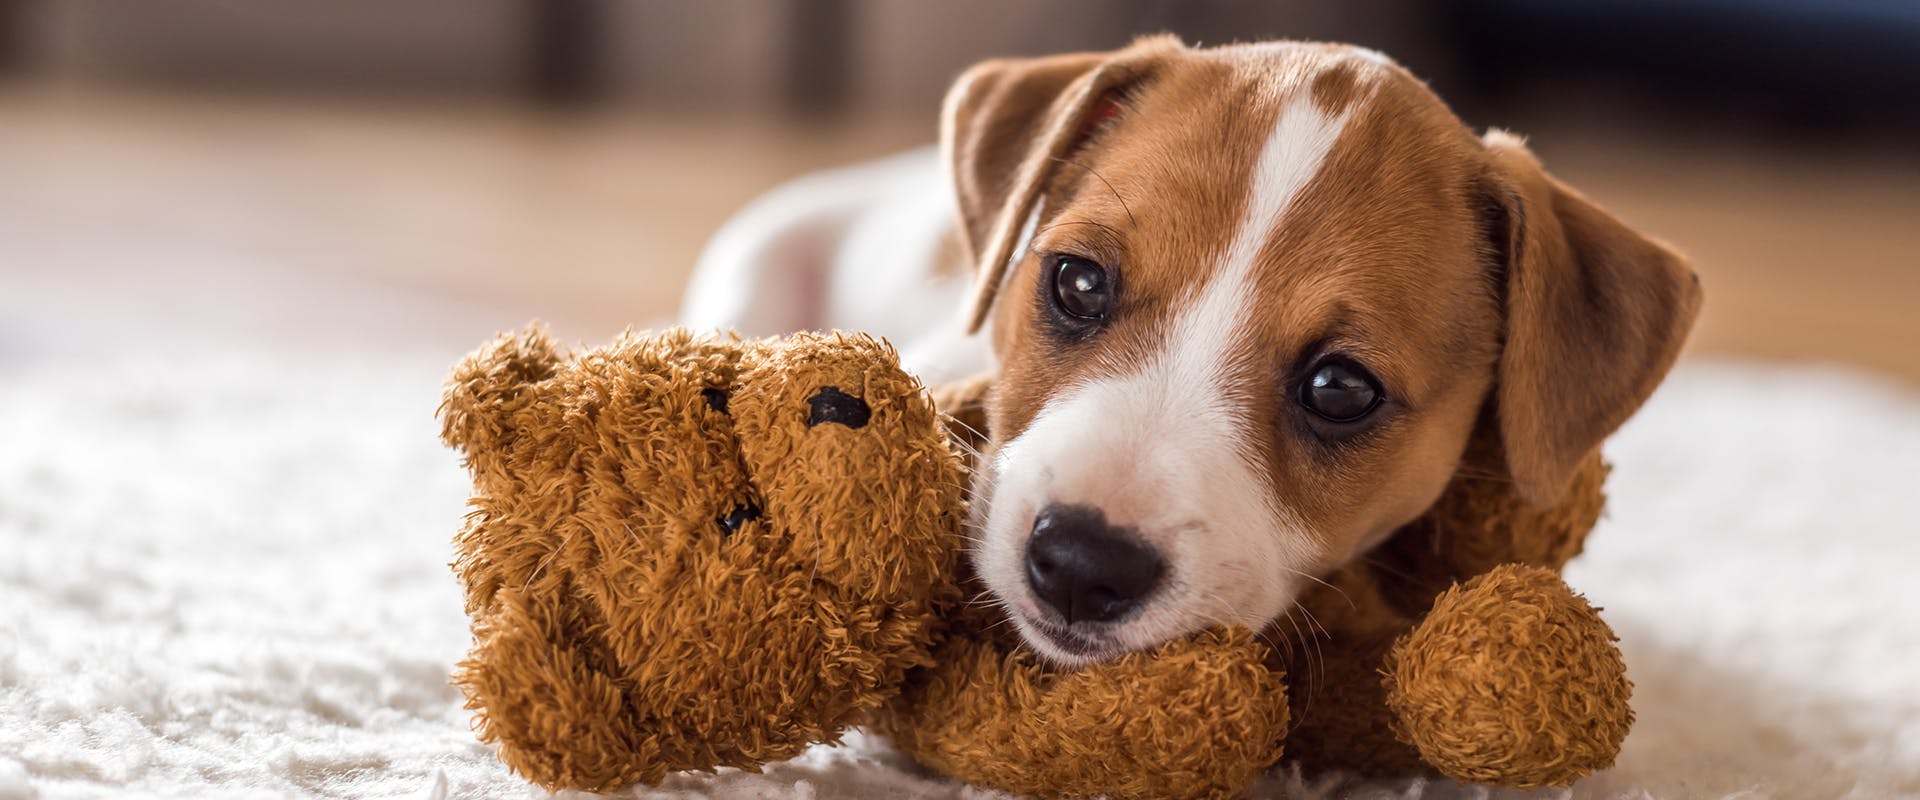 A cute Jack Russell puppy resting its head on a brown teddy bear